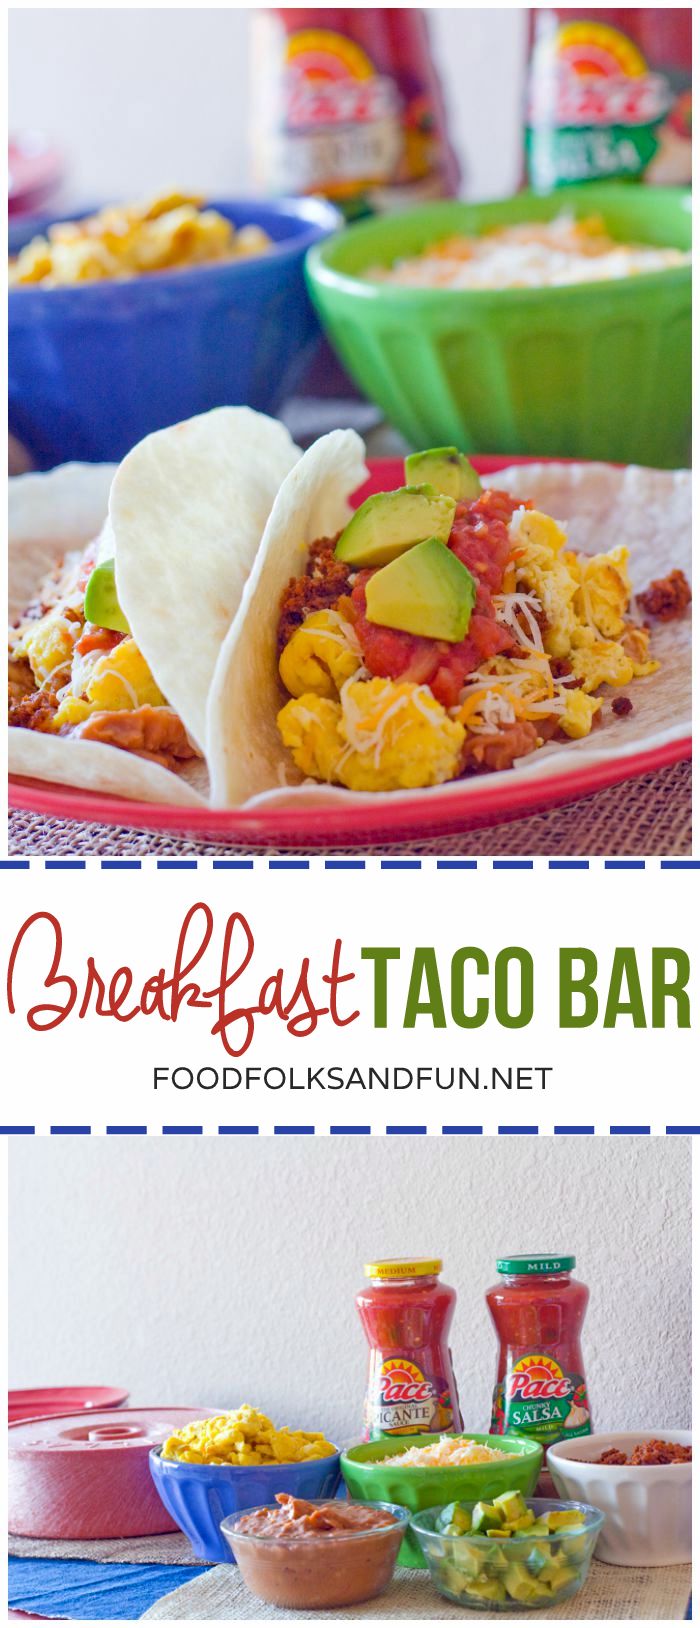 This Breakfast Taco Bar is my secret weapon for out of town guests. It’s easy to prepare and throw together and everyone always loves it! via @foodfolksandfun